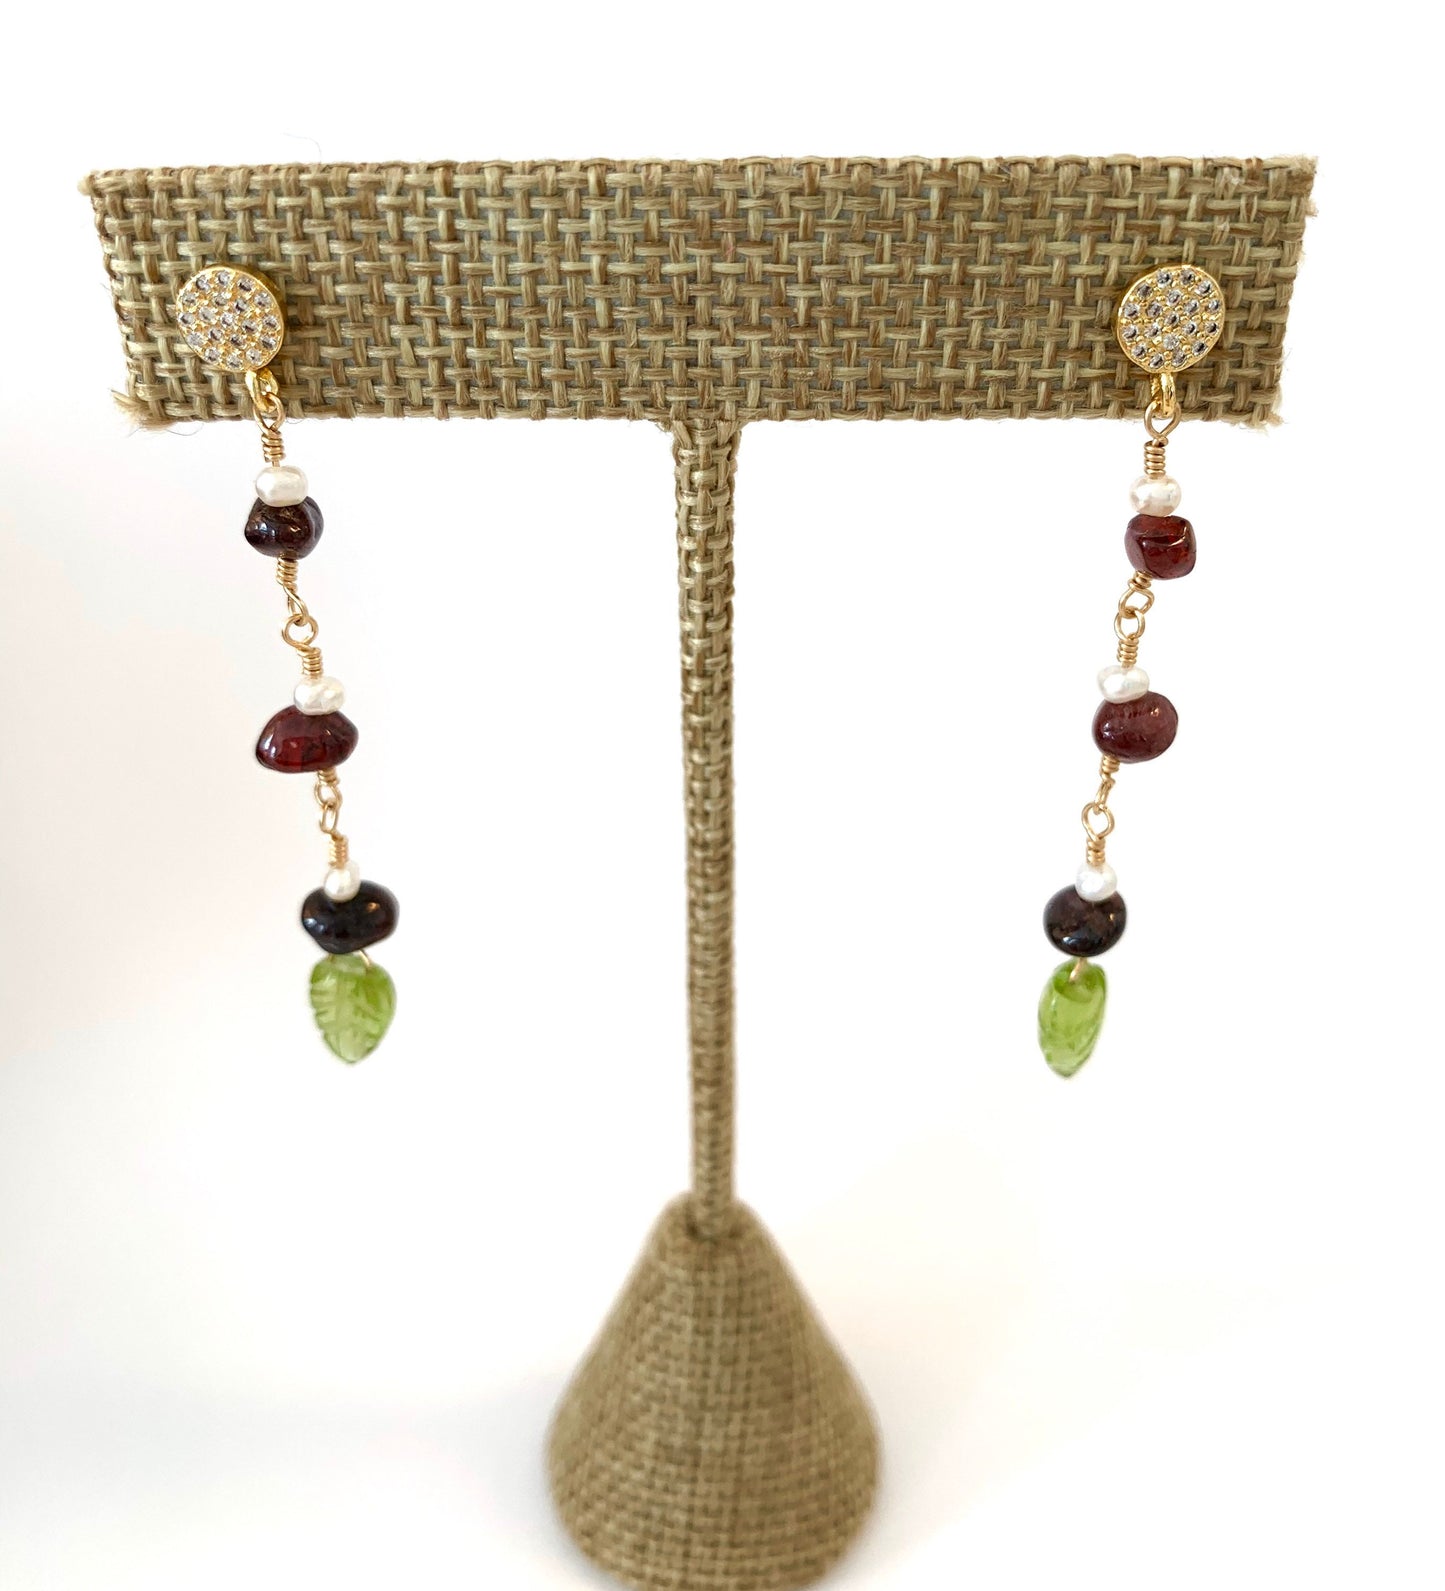 yellow gold filled dangle earring with pave' cz round studs and 3 garnet and pearl stations suspended from chain.  carved peridot leaves hang from the bottom.